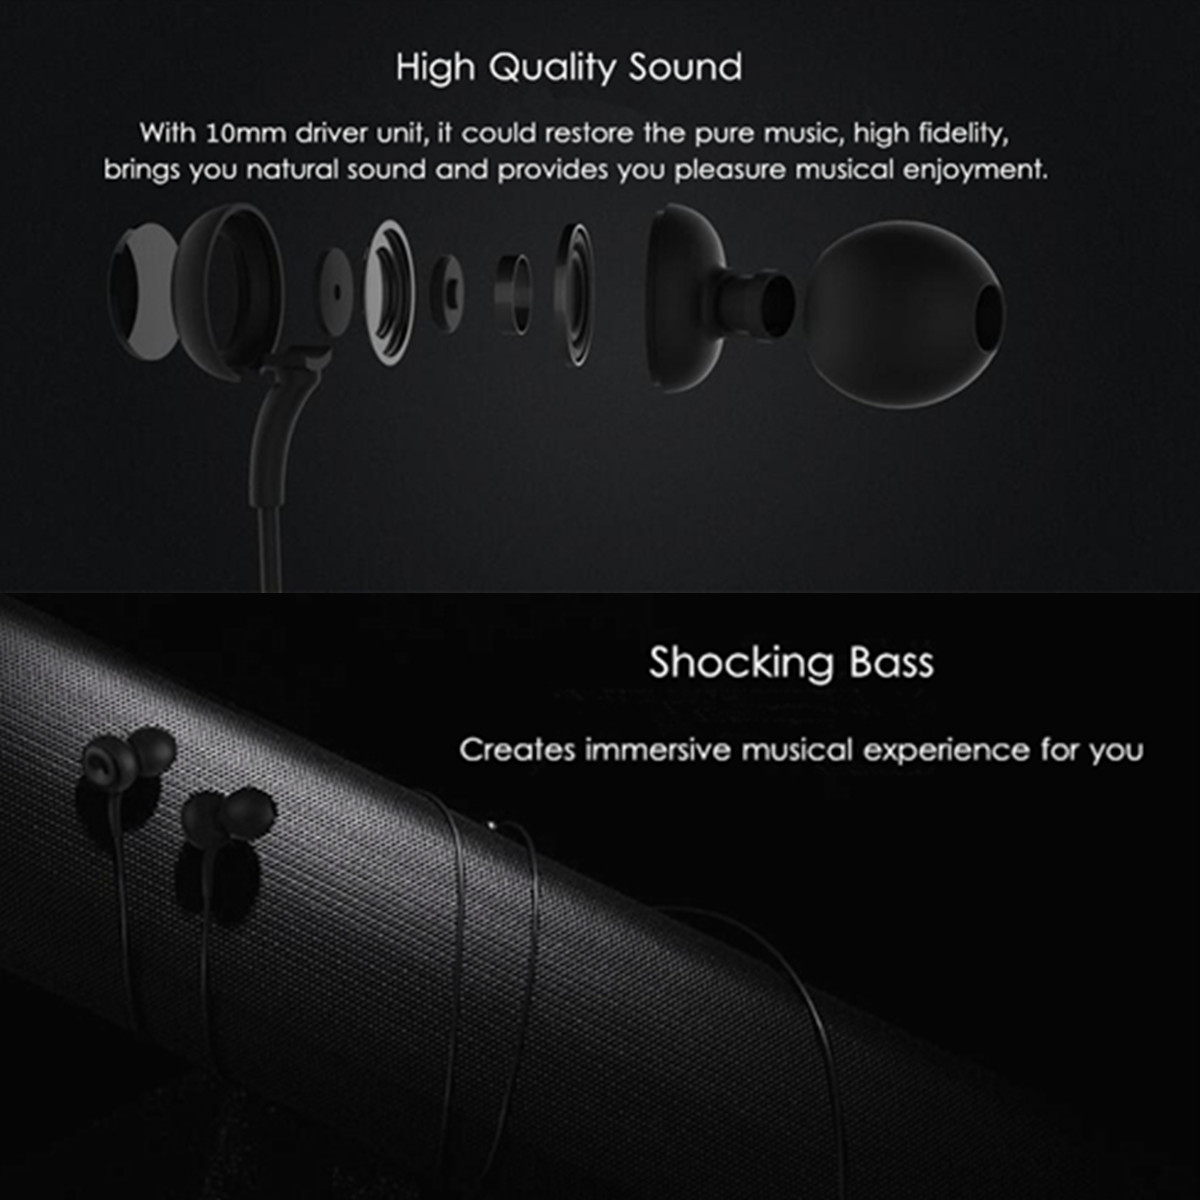 Remax-RM-510-35mm-Wired-Control-Earbuds-Earphone-In-ear-Stereo-Light-Headphone-with-Mic-1515466-2